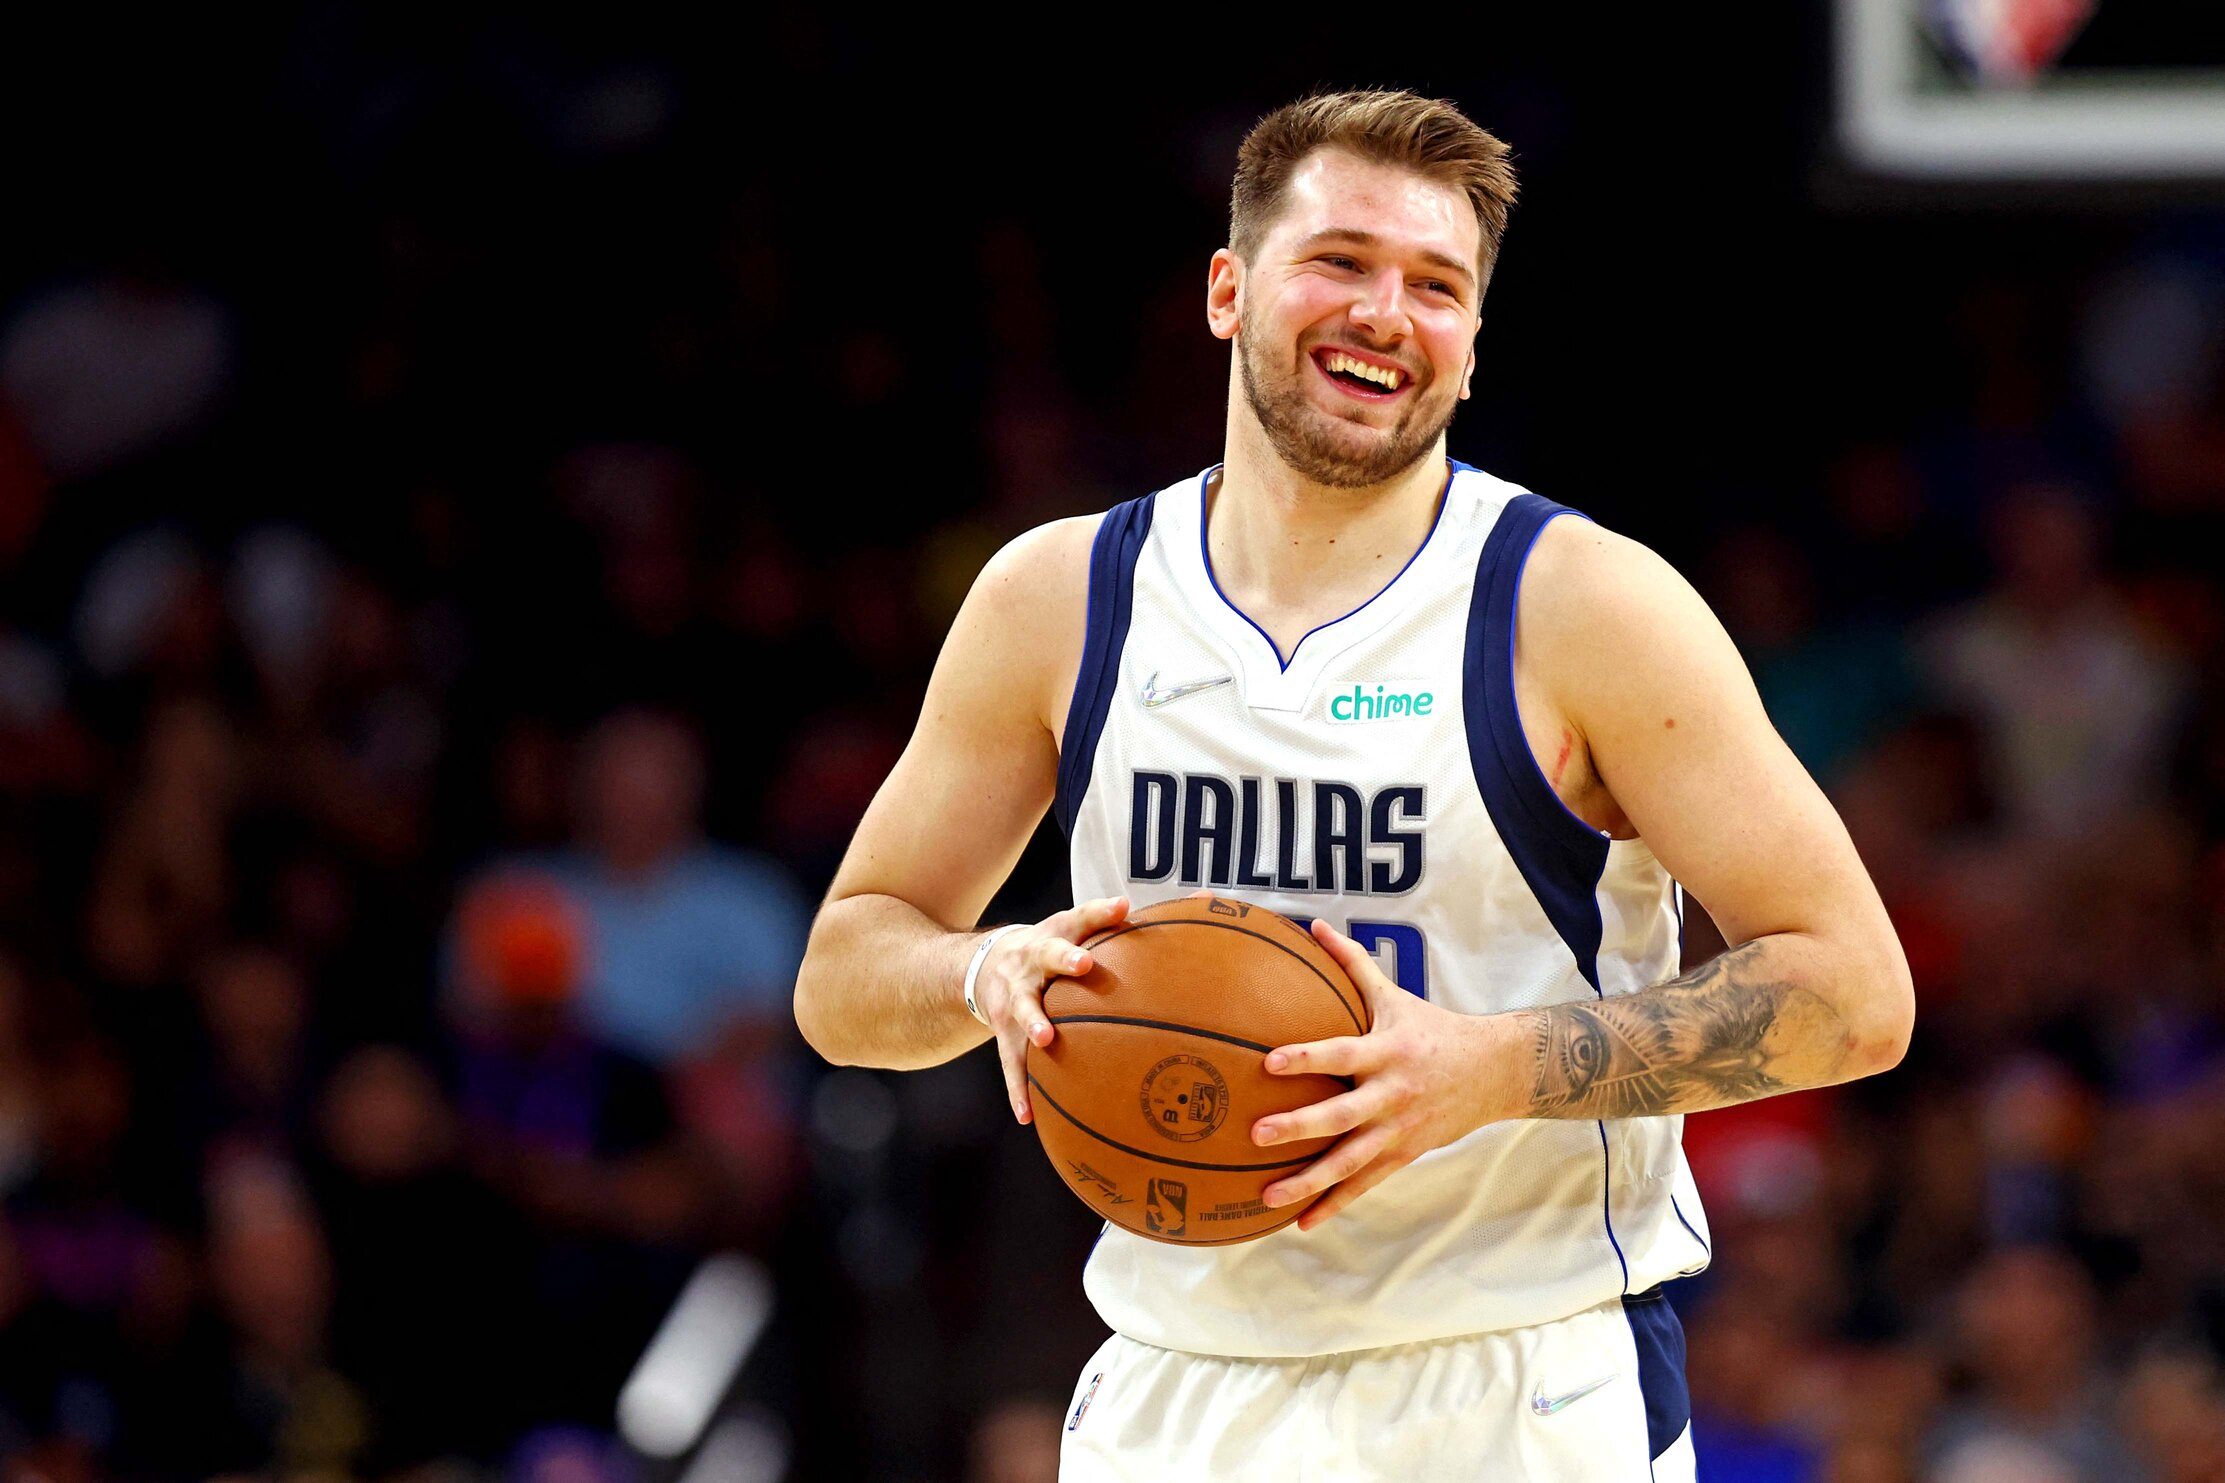 LOOK: Luka Doncic arrives in style driving a tank ahead of Mavs-Hawks game